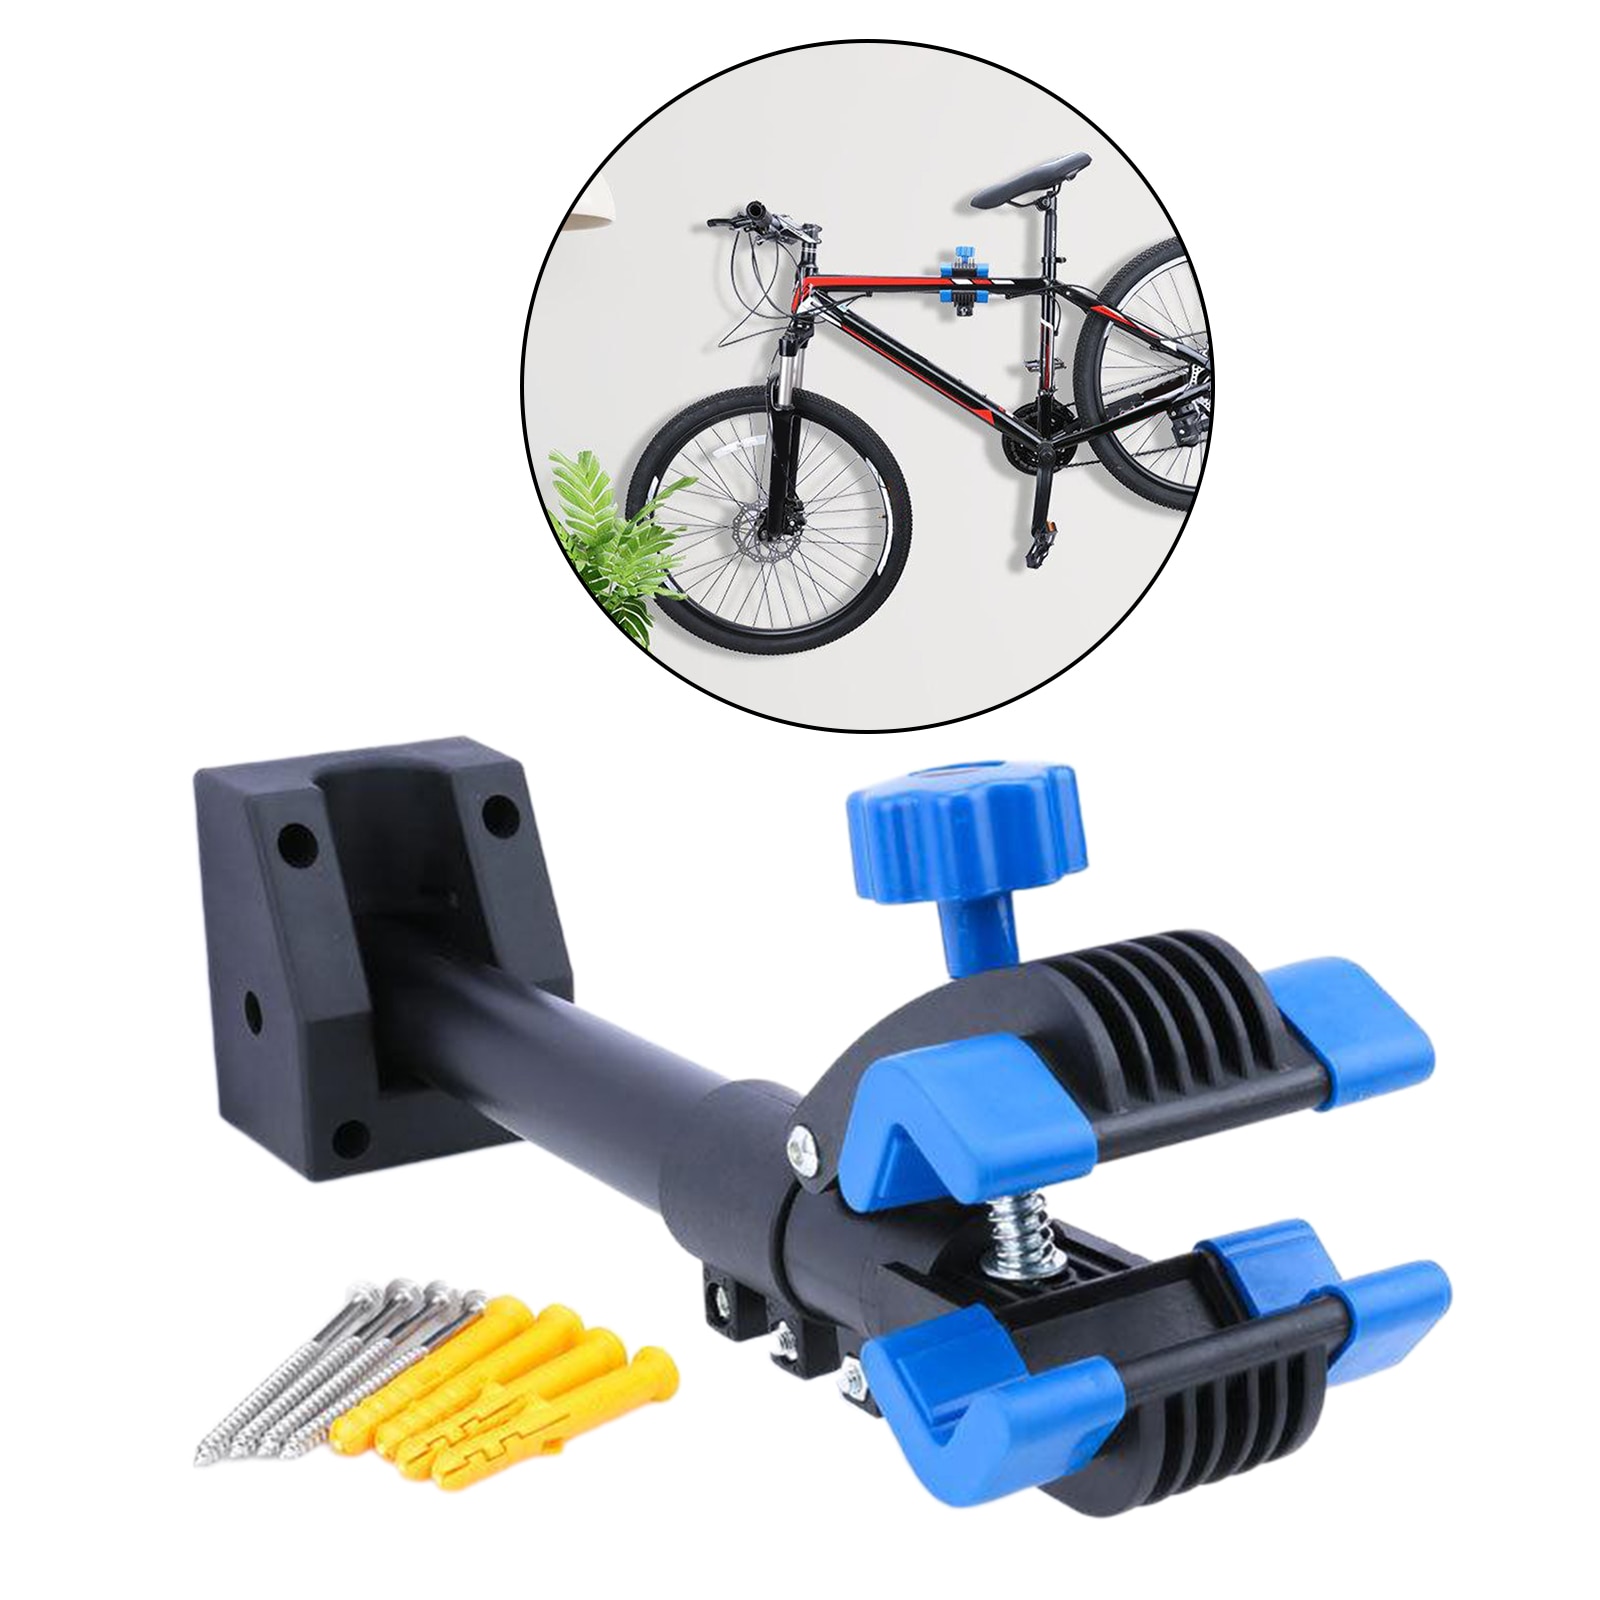 Deluxe Bike Wall-Mount Repair Stand Clamp Bicycle Home Garage Wall Mounted Hanger Storage Hook- Rotatable, Folding